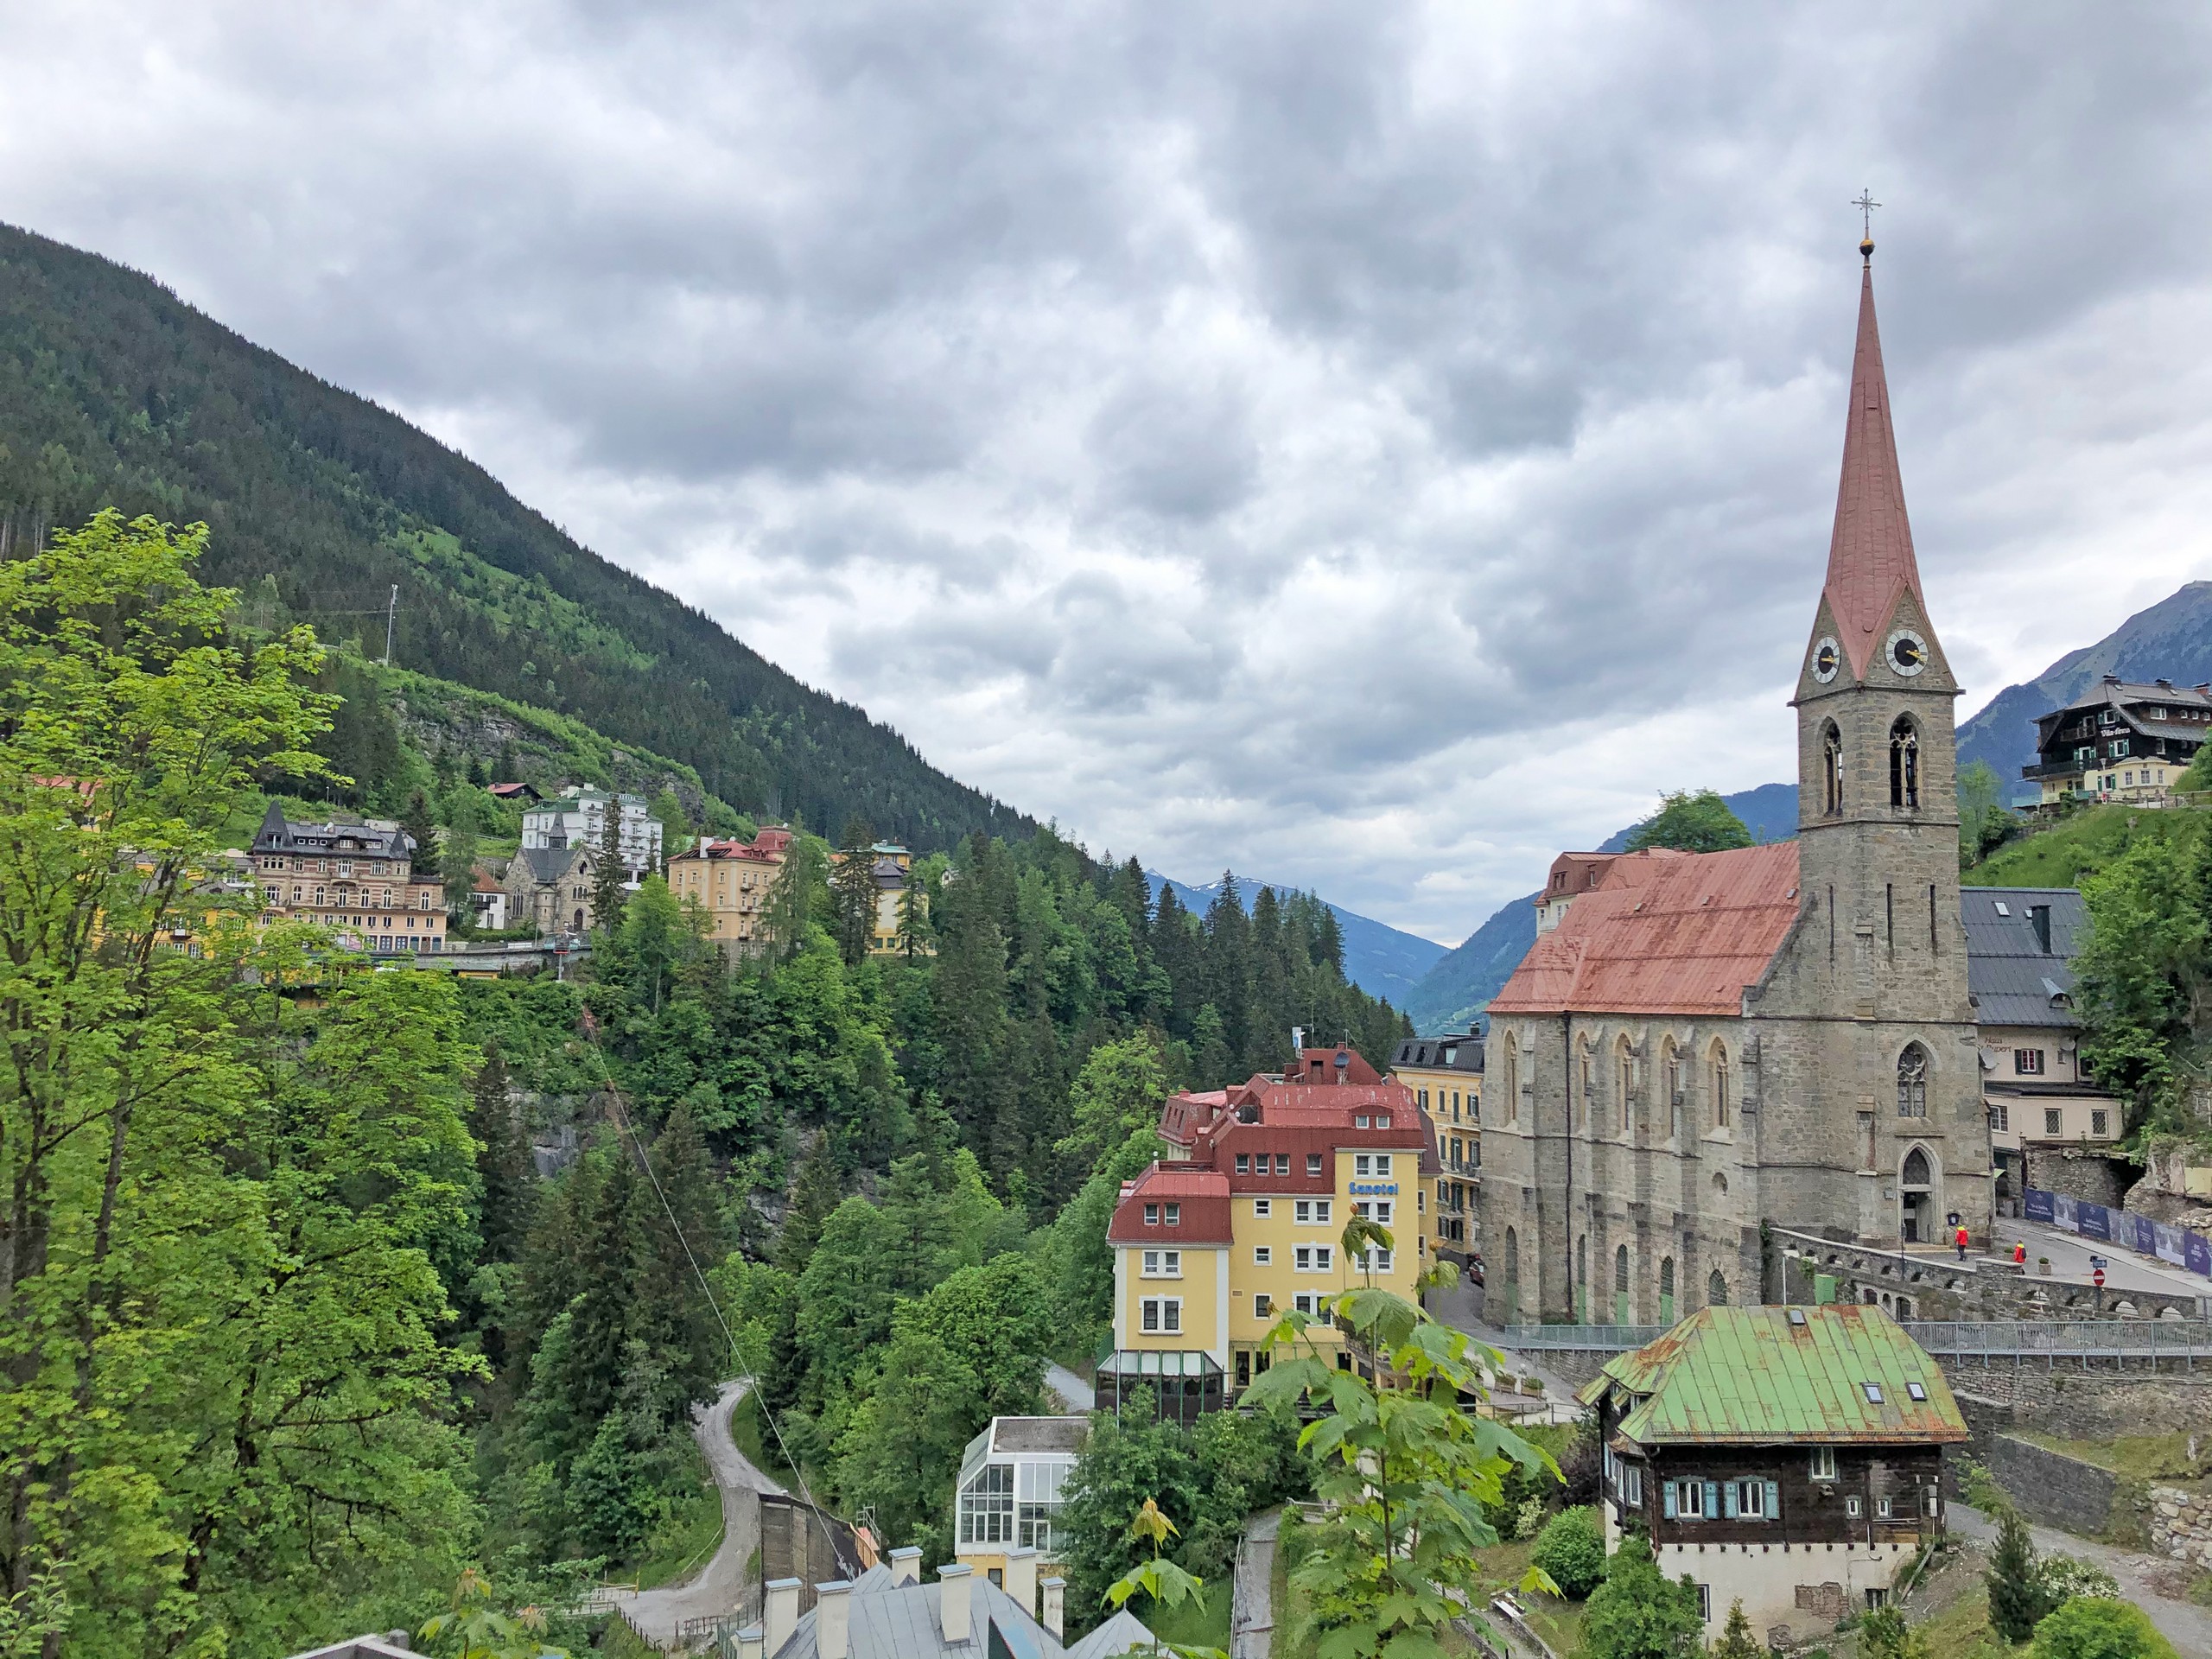 Beautiful cities and towns along the Alpe Adria route in Austria